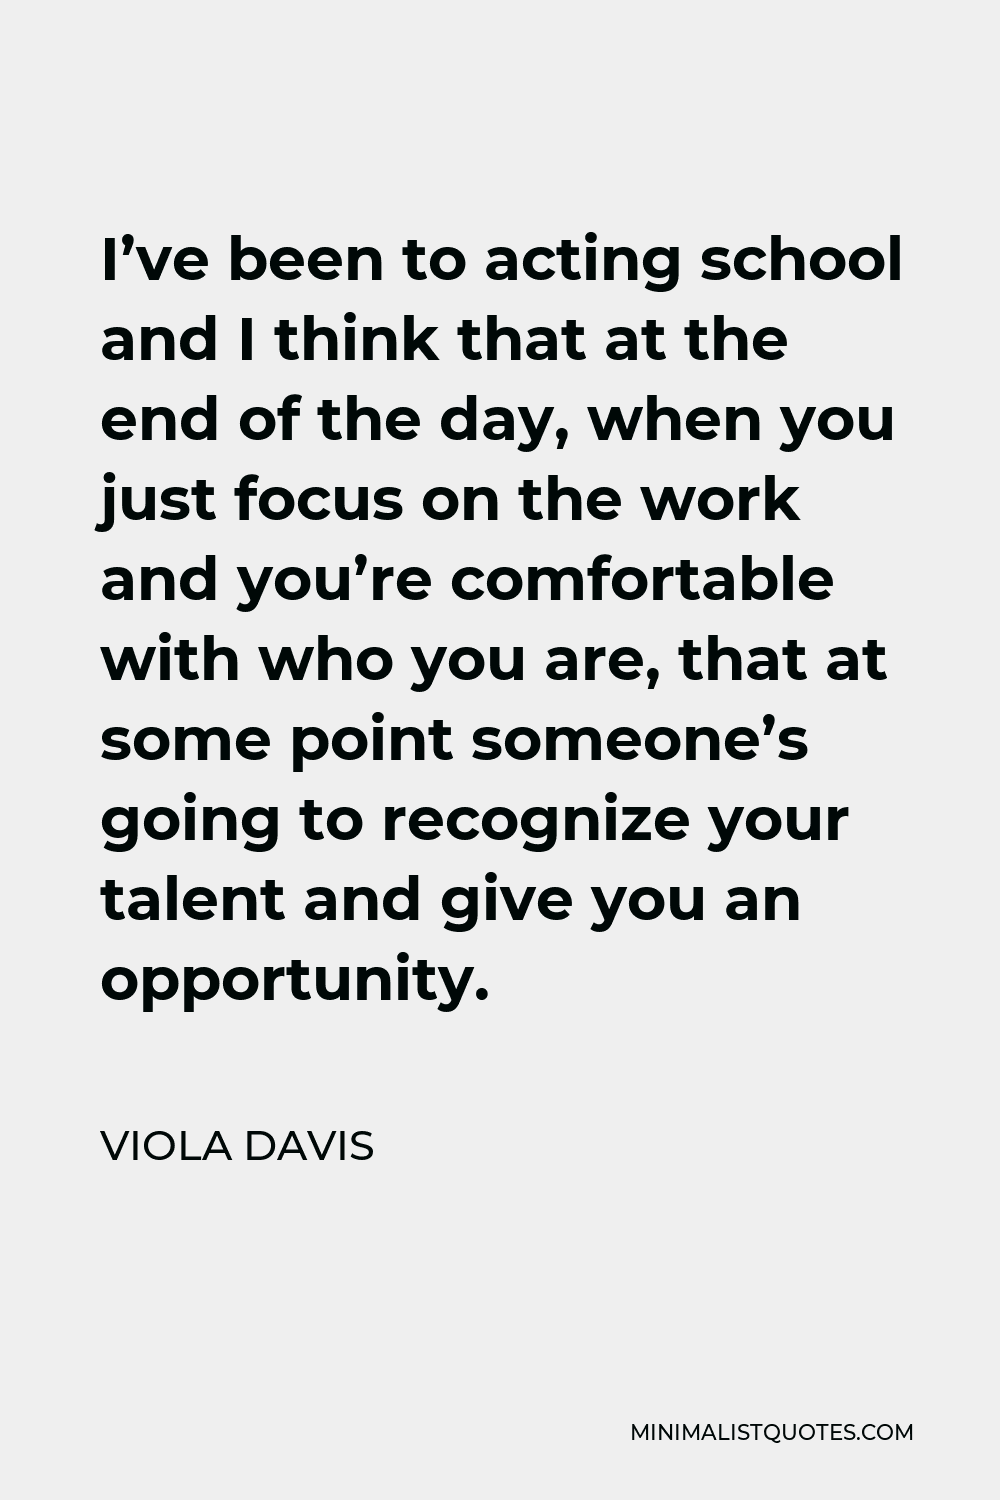 Viola Davis Quote - I’ve been to acting school and I think that at the end of the day, when you just focus on the work and you’re comfortable with who you are, that at some point someone’s going to recognize your talent and give you an opportunity.